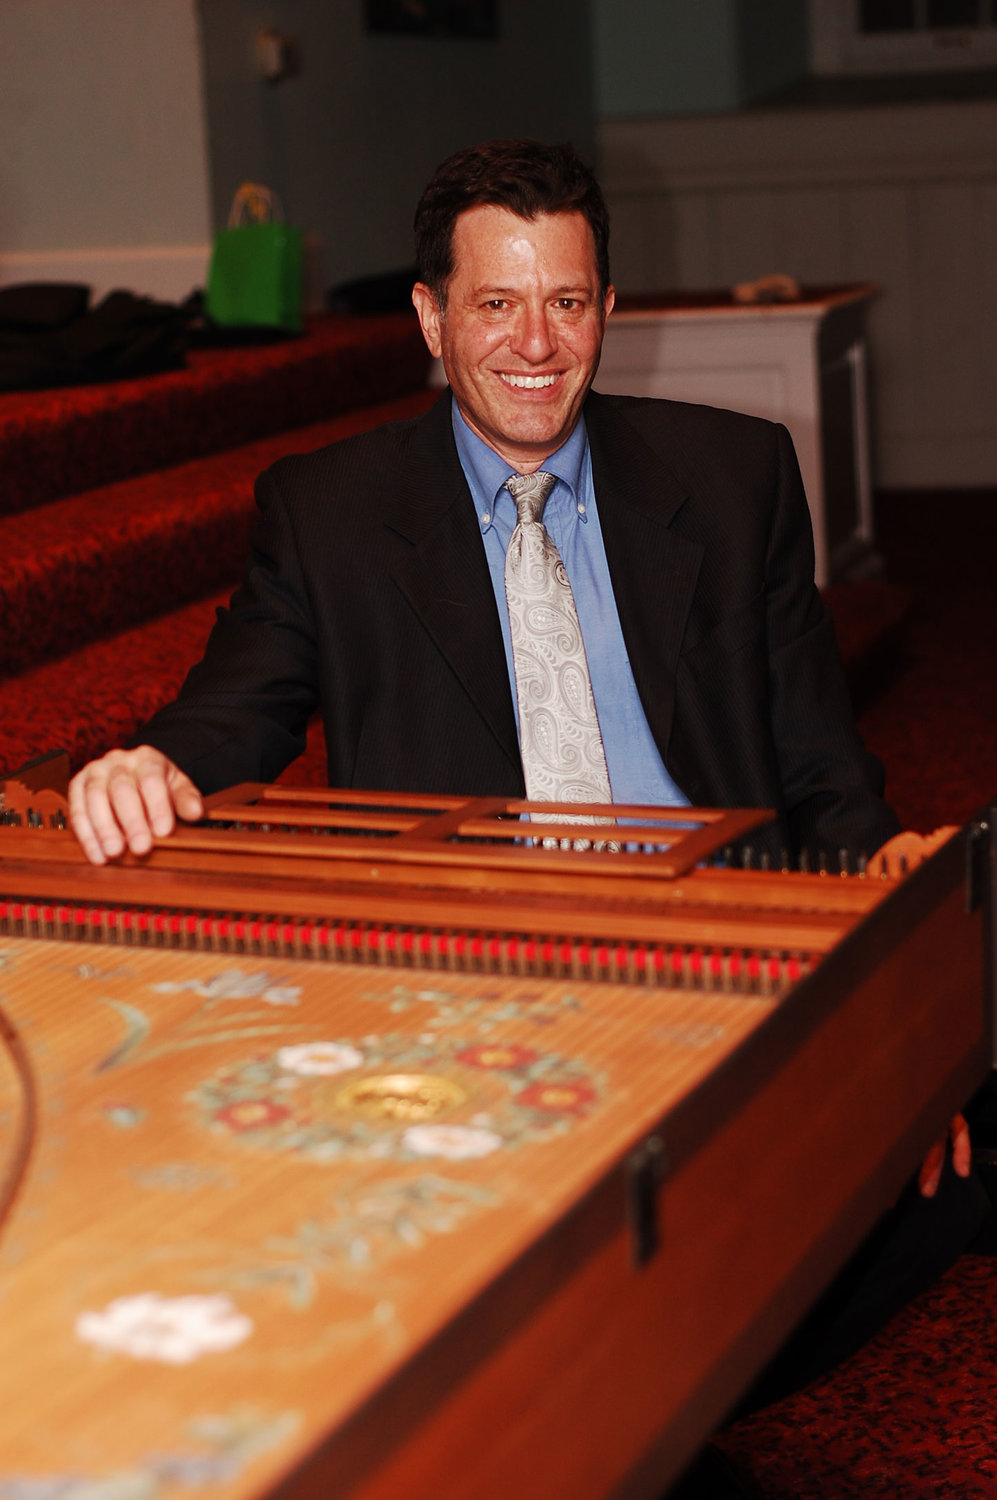 Lewis Baratz is founder and director of the baroque music ensemble La Fiocco.